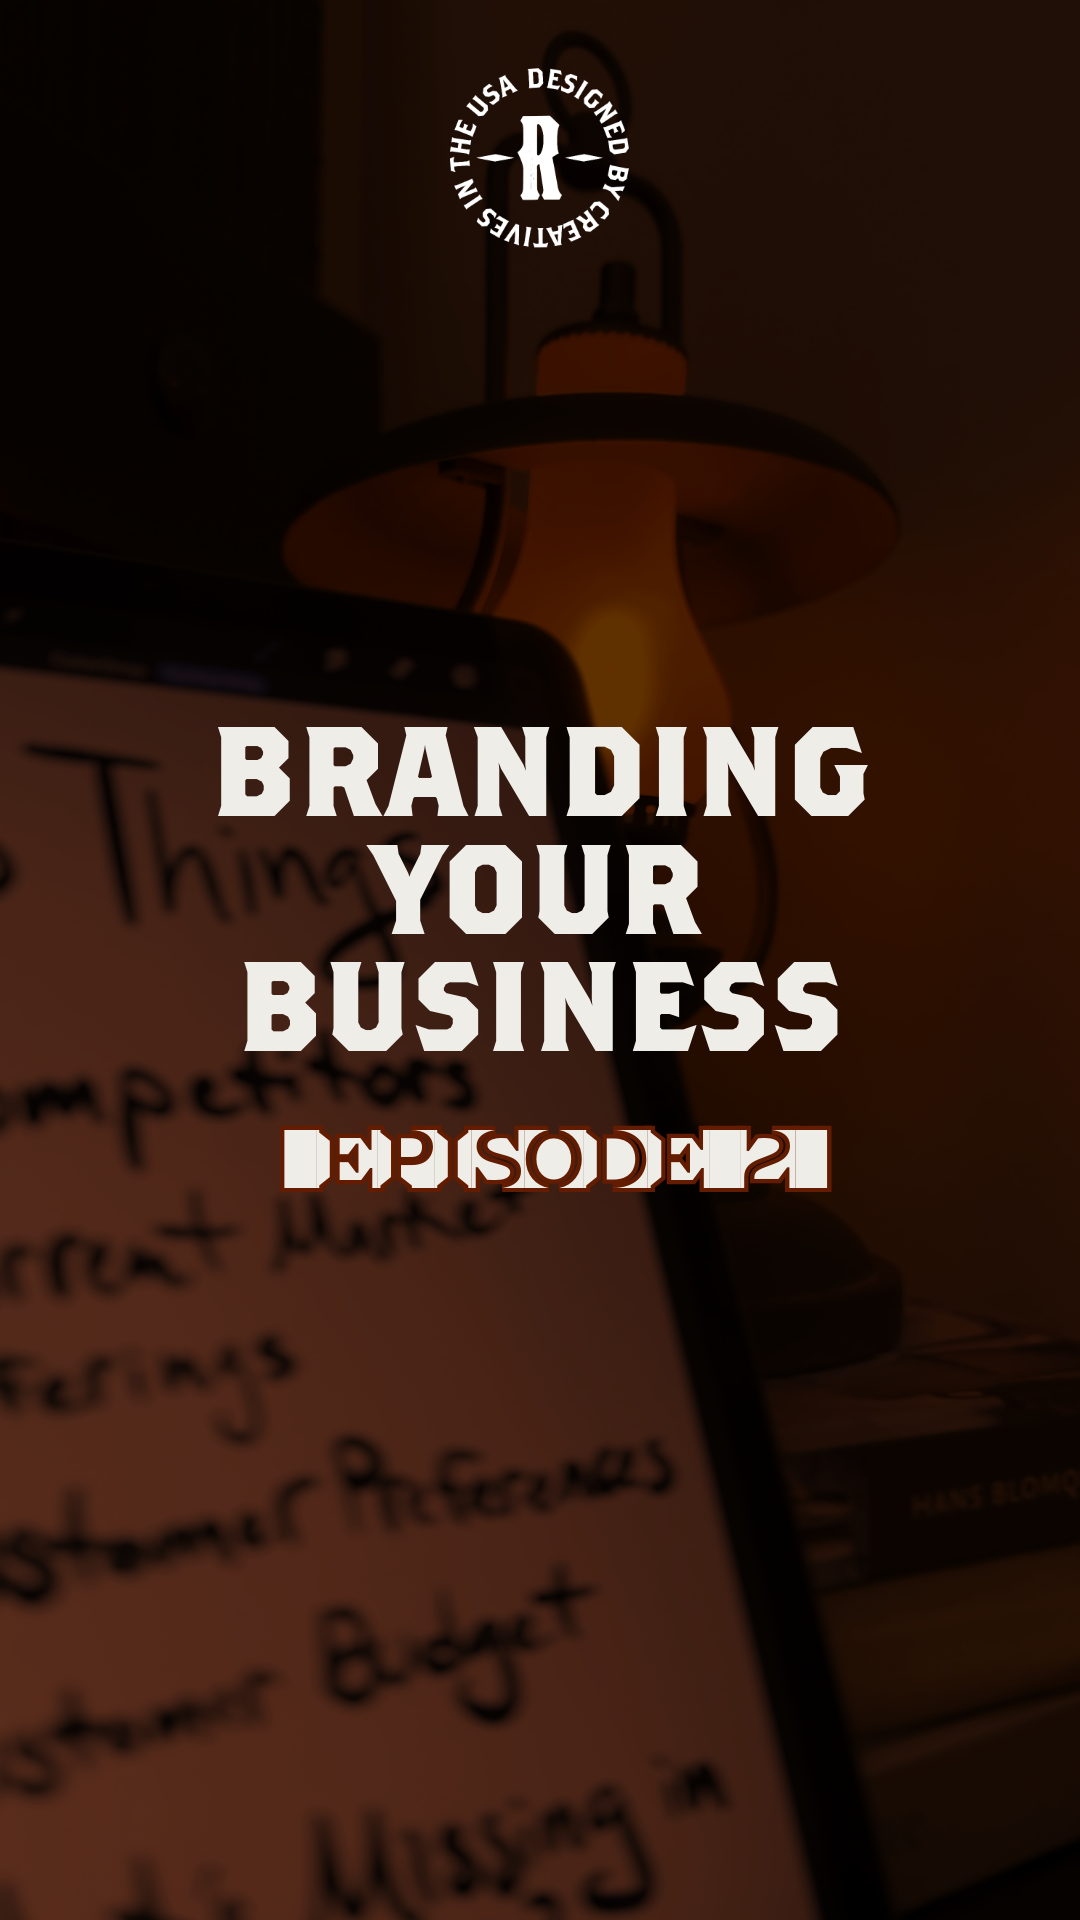 Branding Your Business Episode 2: Know exactly what your customers want by identifying these 5 things